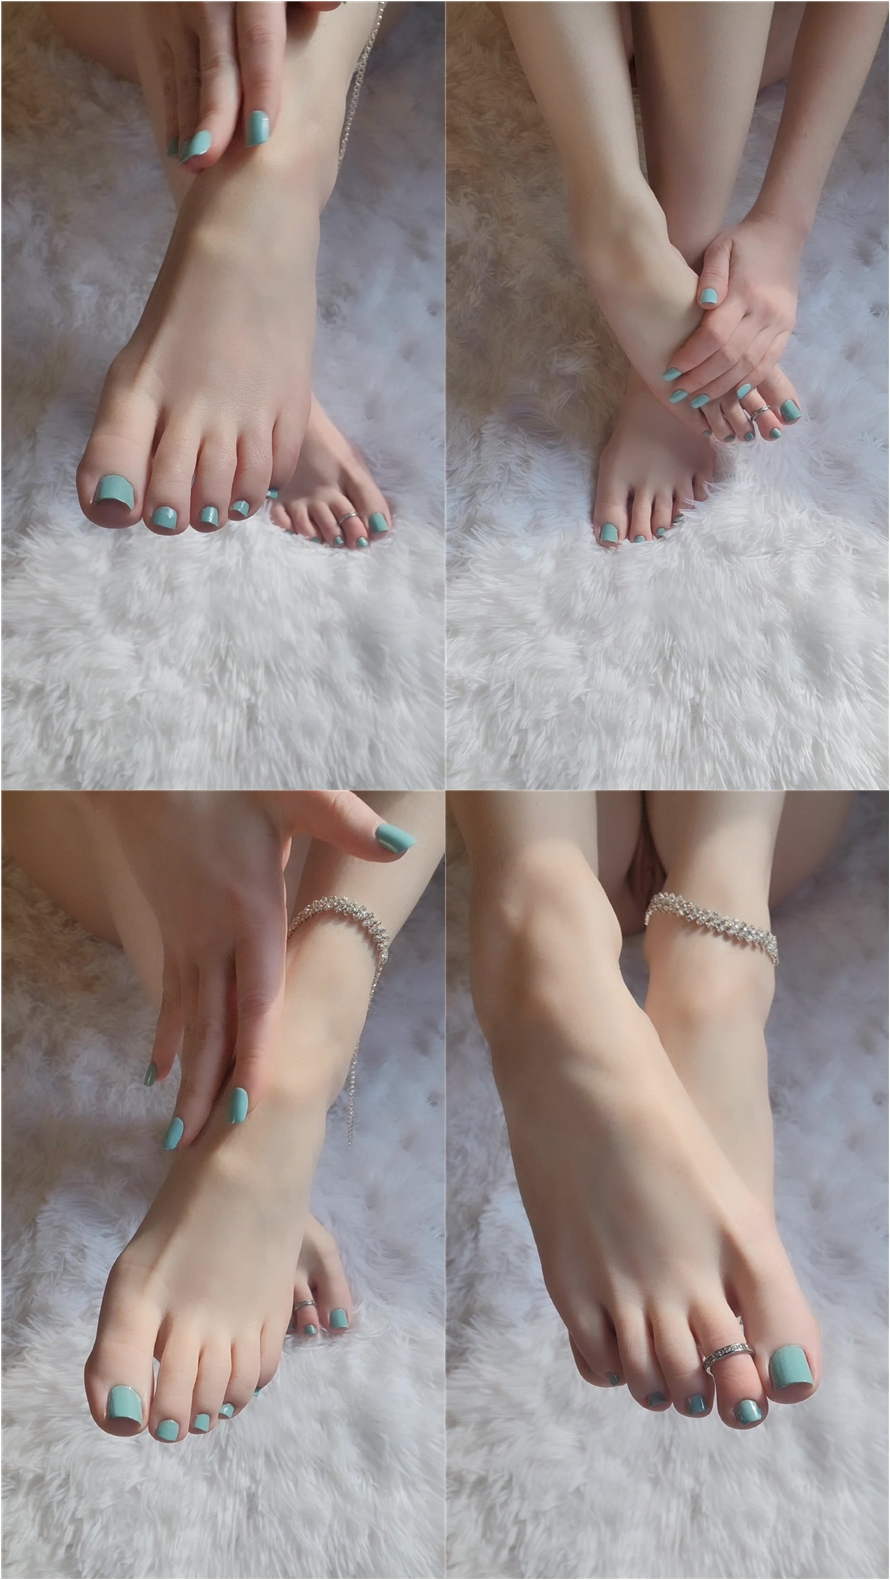 TheTinyFeetTreat - Blue Manicure and Pedicure Show Off